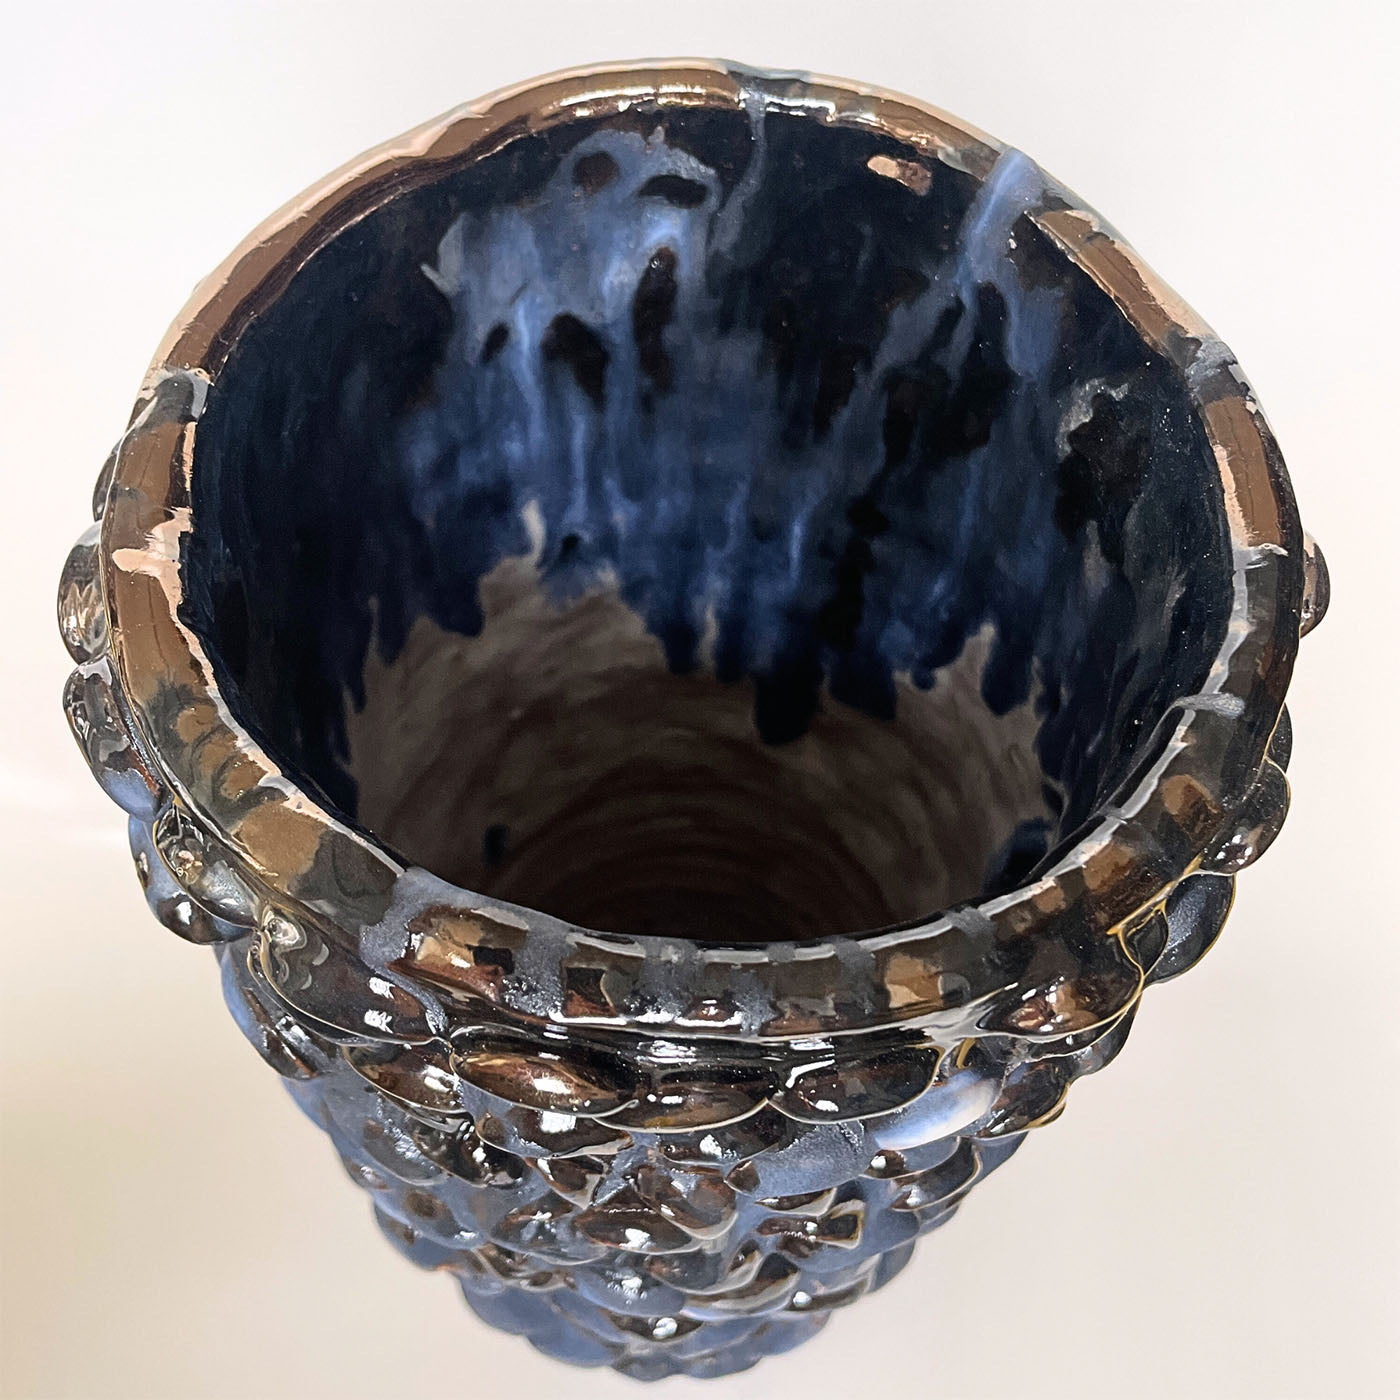 Cylindrical Blue and Black Vase - Alternative view 1